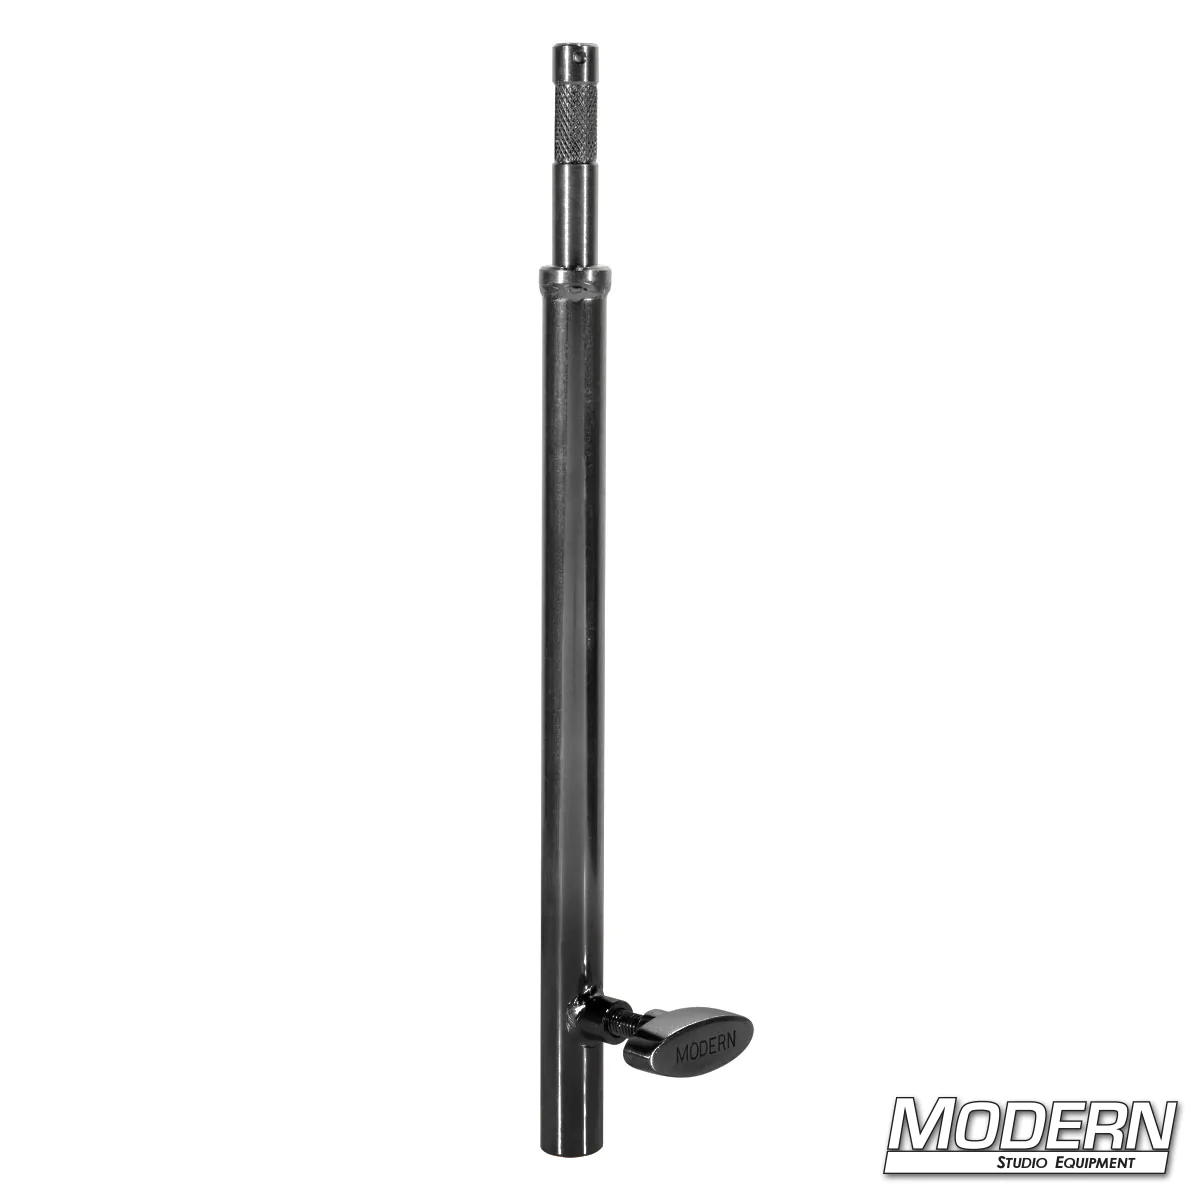 12-inch Baby Stand Extension - Black Zinc